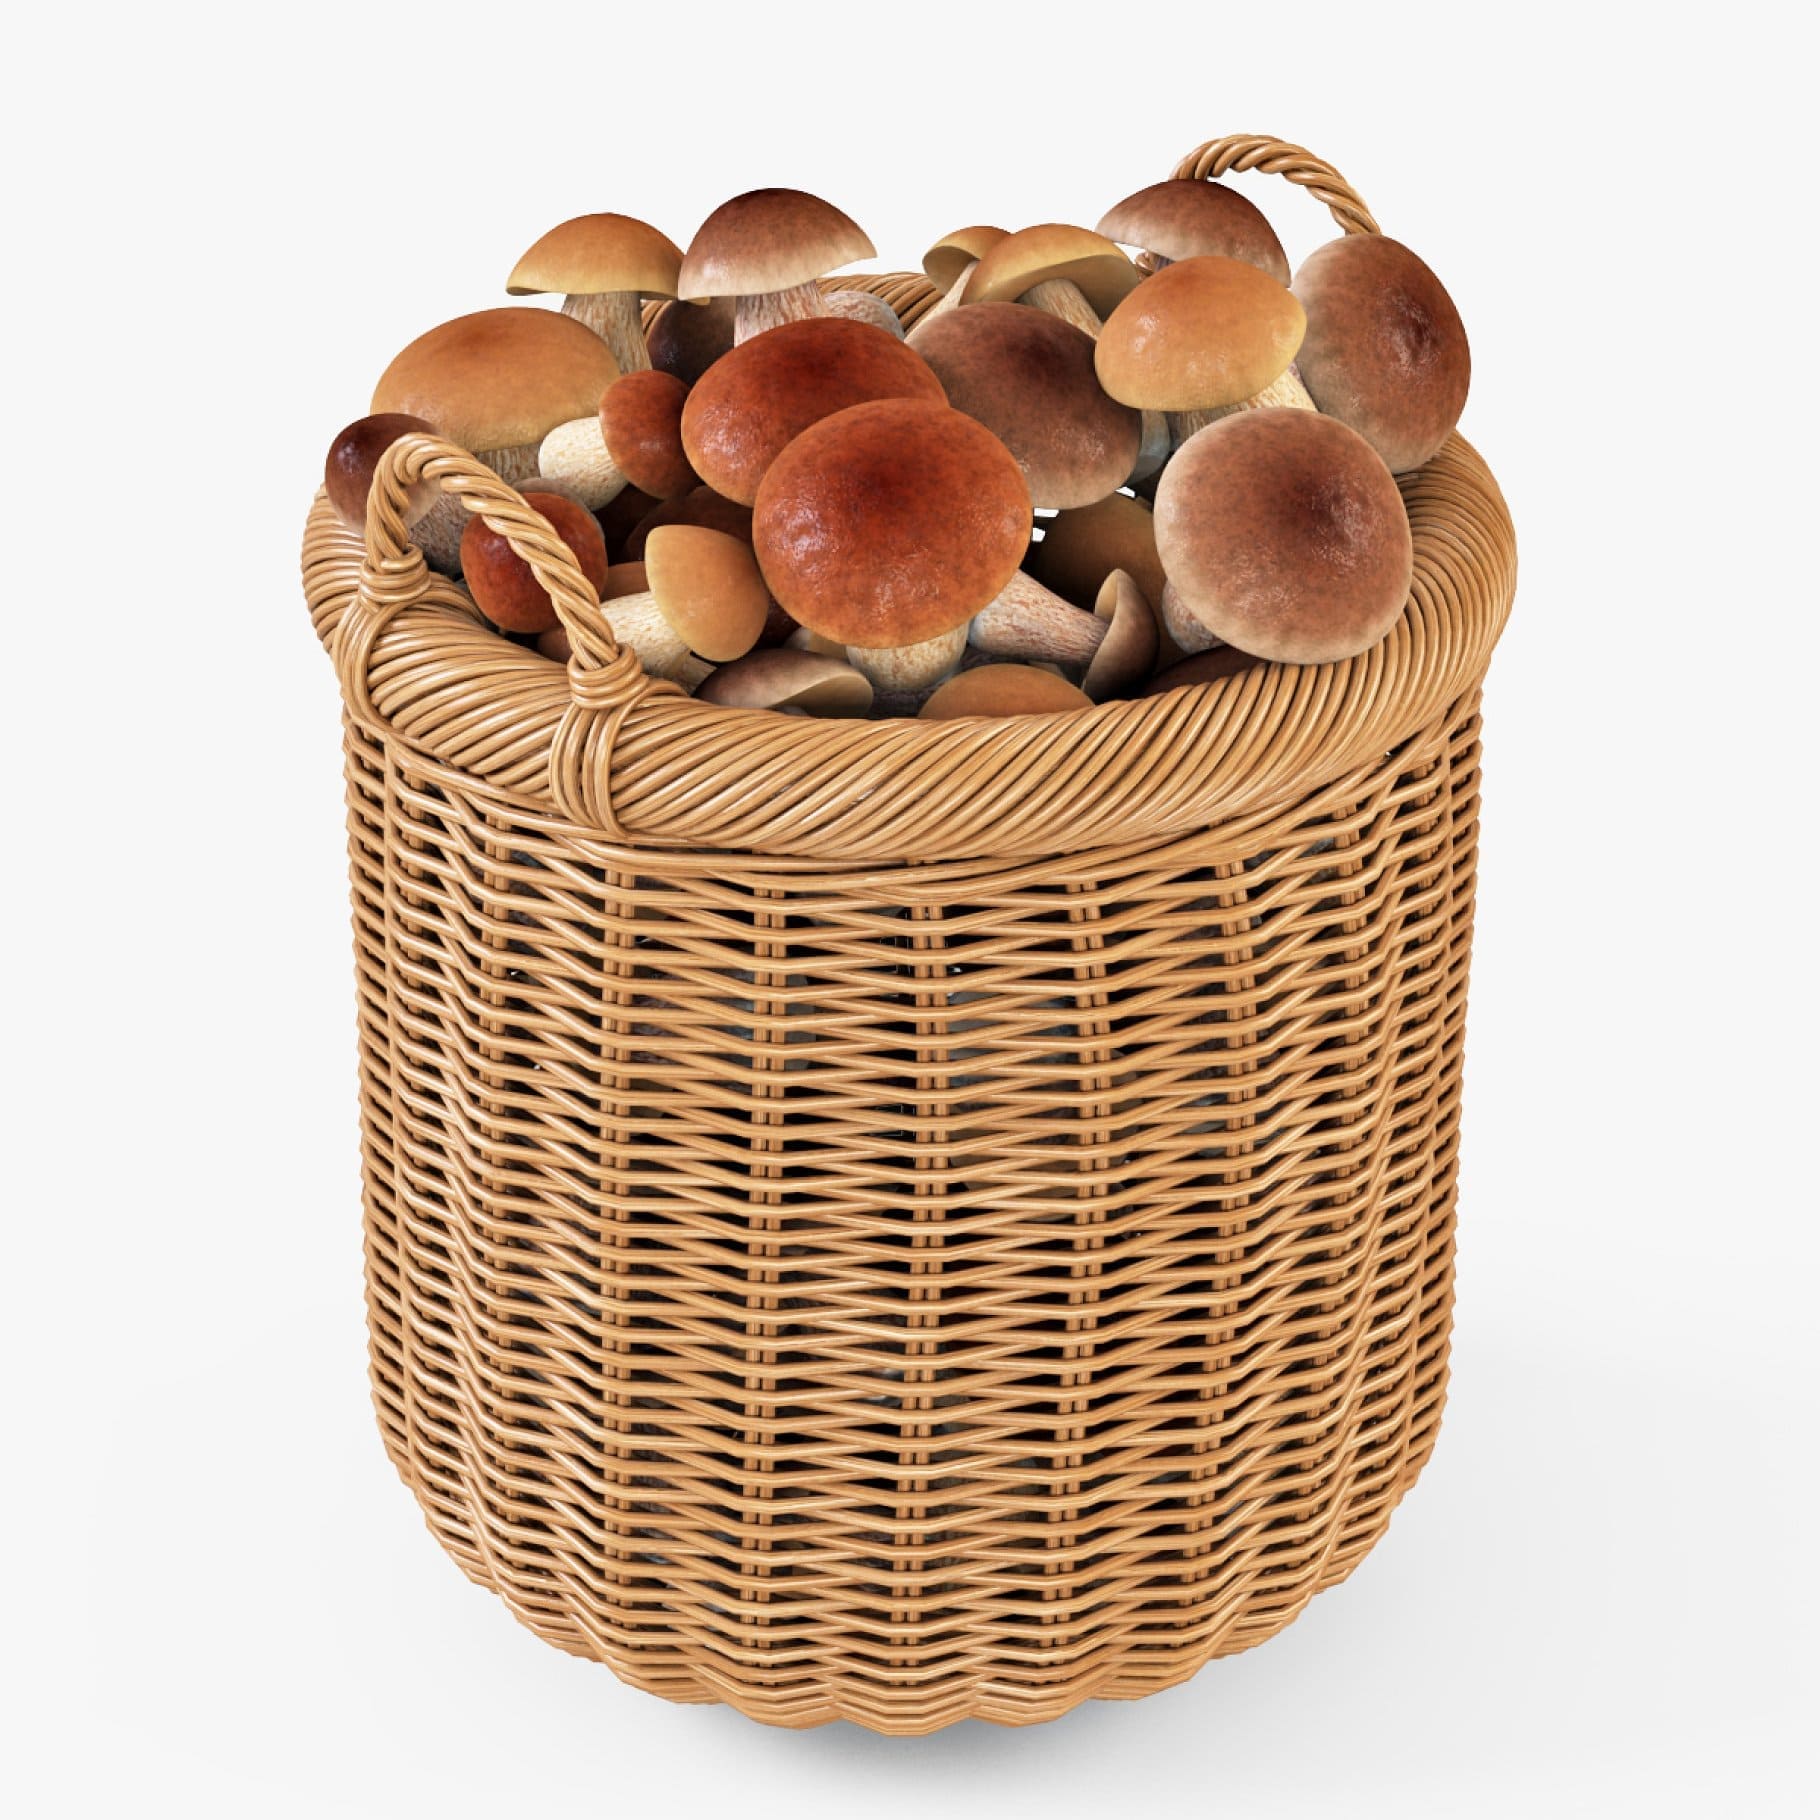 Brown mushrooms with white legs in a wicker basket.